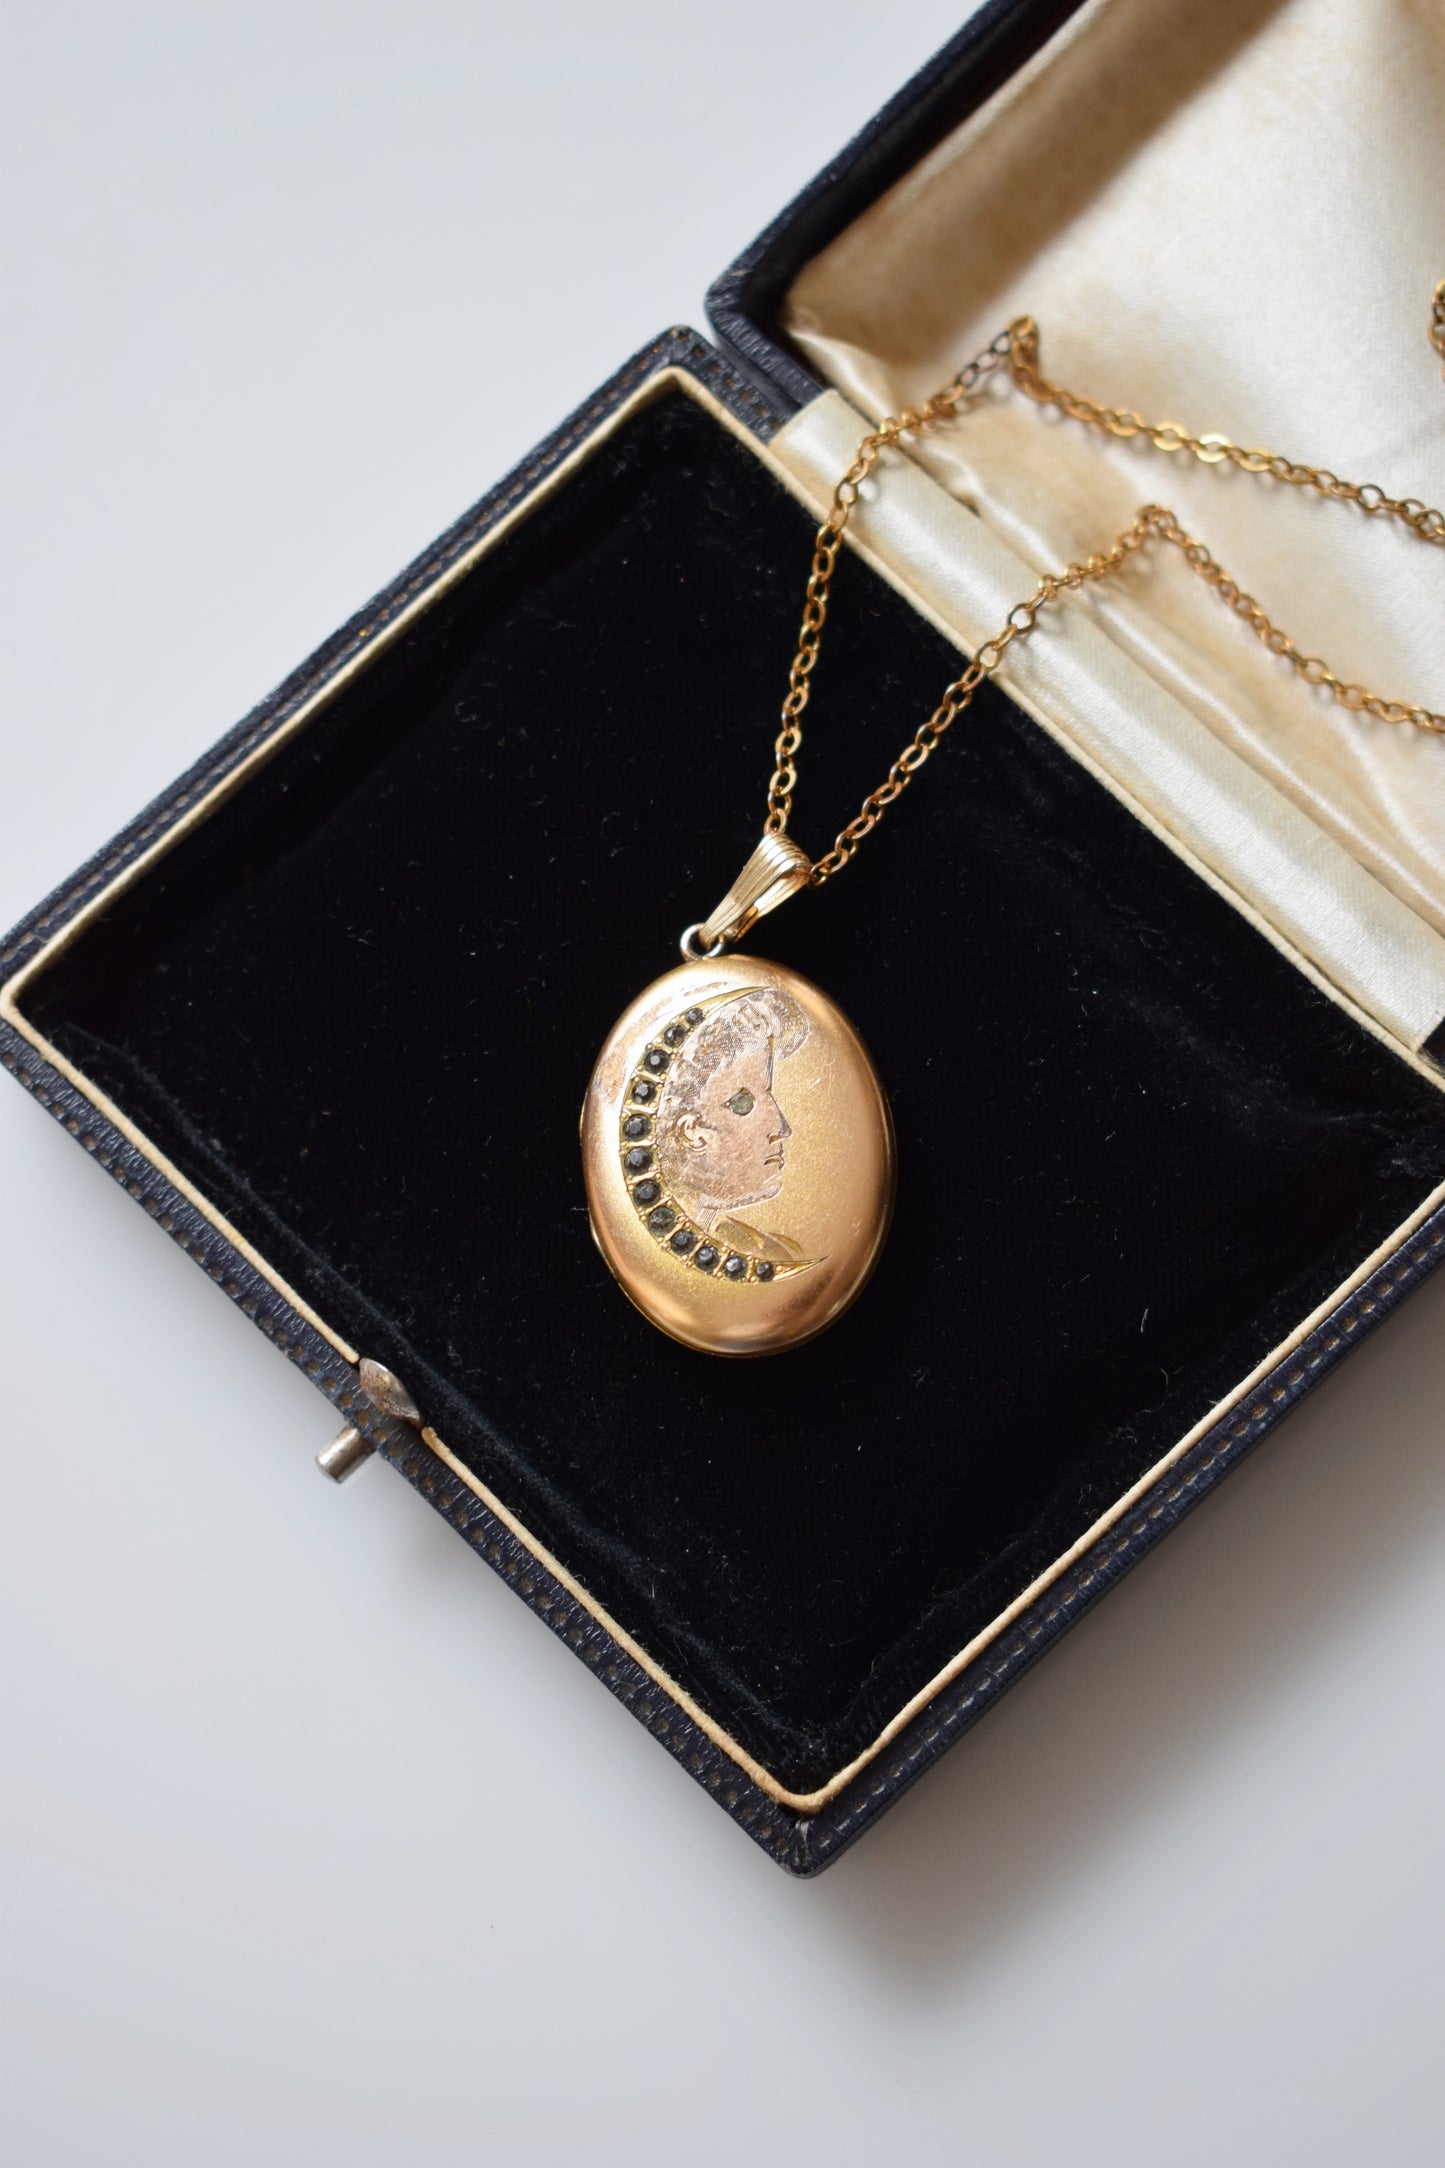 Antique Lady in the Moon Locket